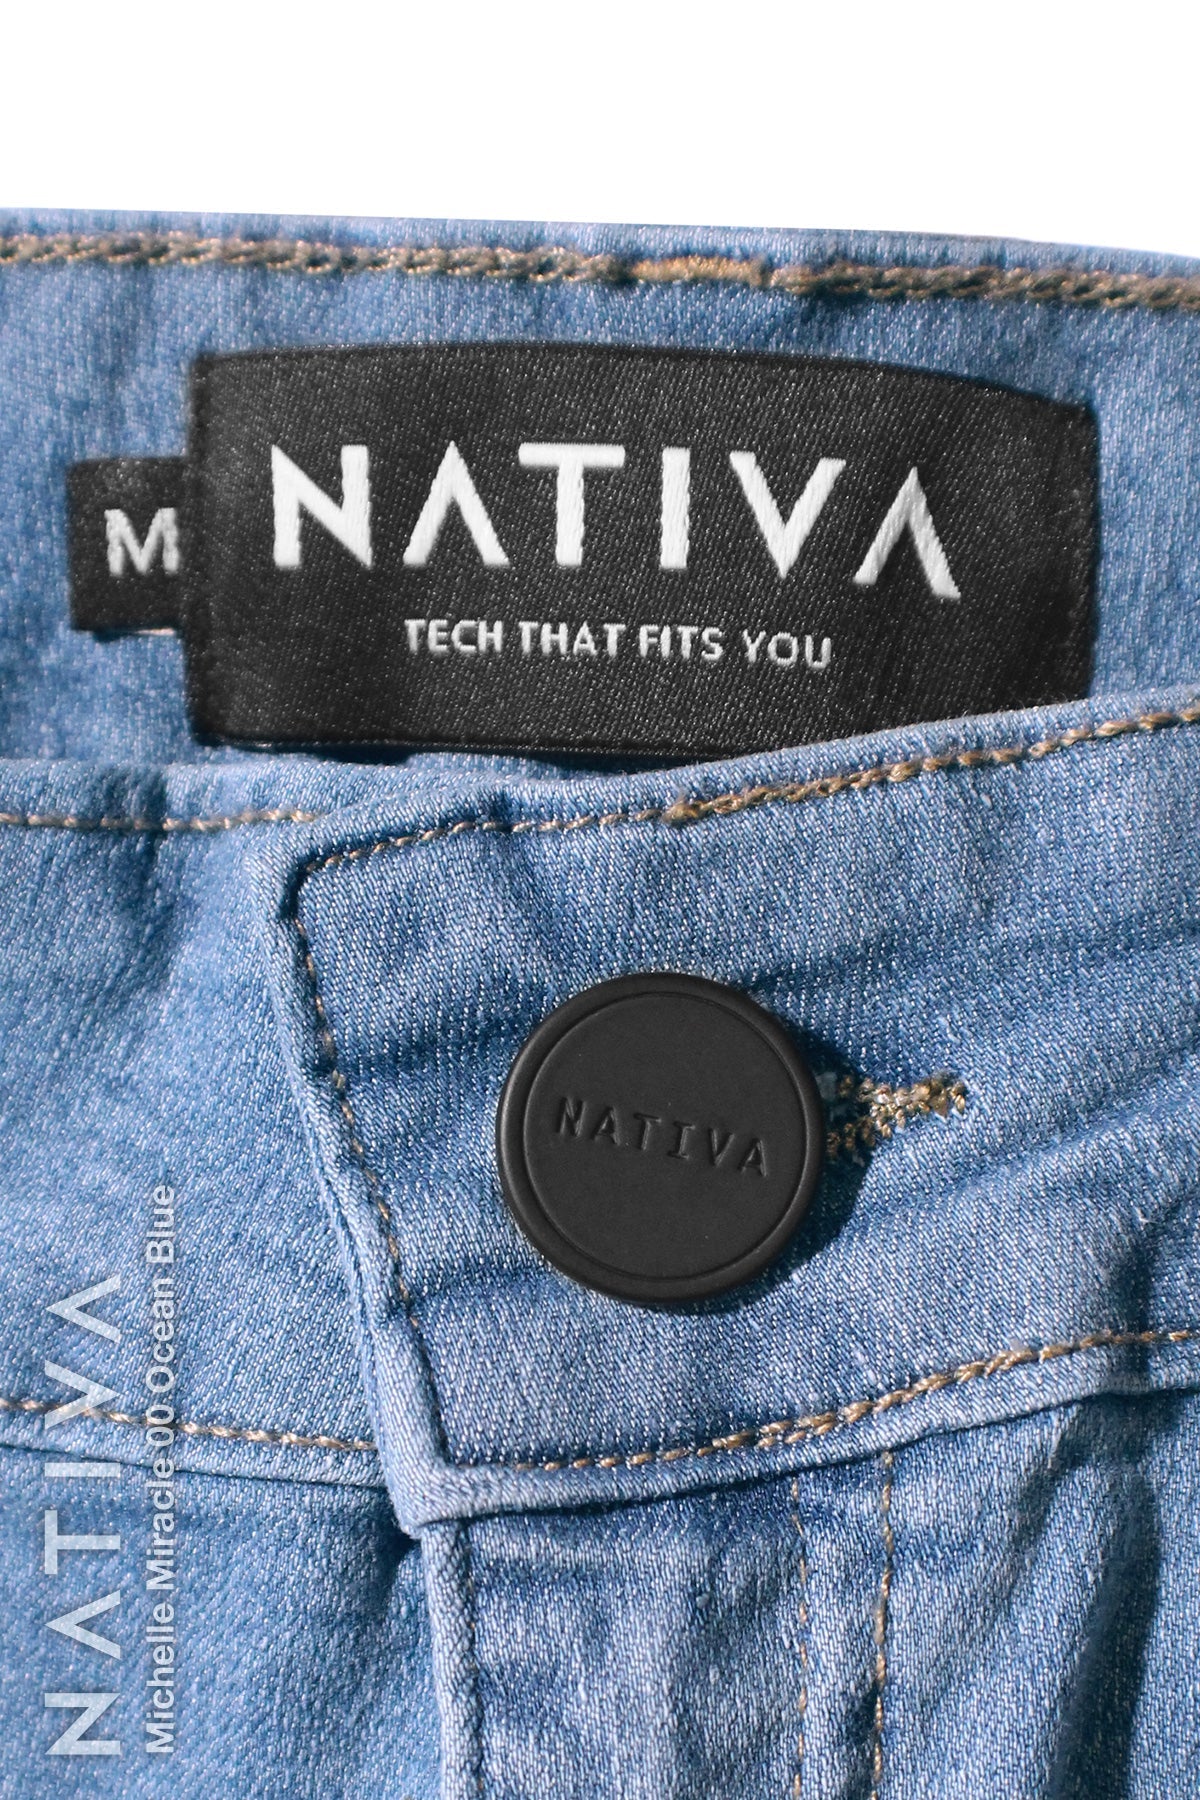 NATIVA, STRETCH JEANS. MICHELLE MIRACLE 00 OCEAN BLUE, High Shaping Capacity, Extreme Motion, Hi-Rise Super Skinny Jeans